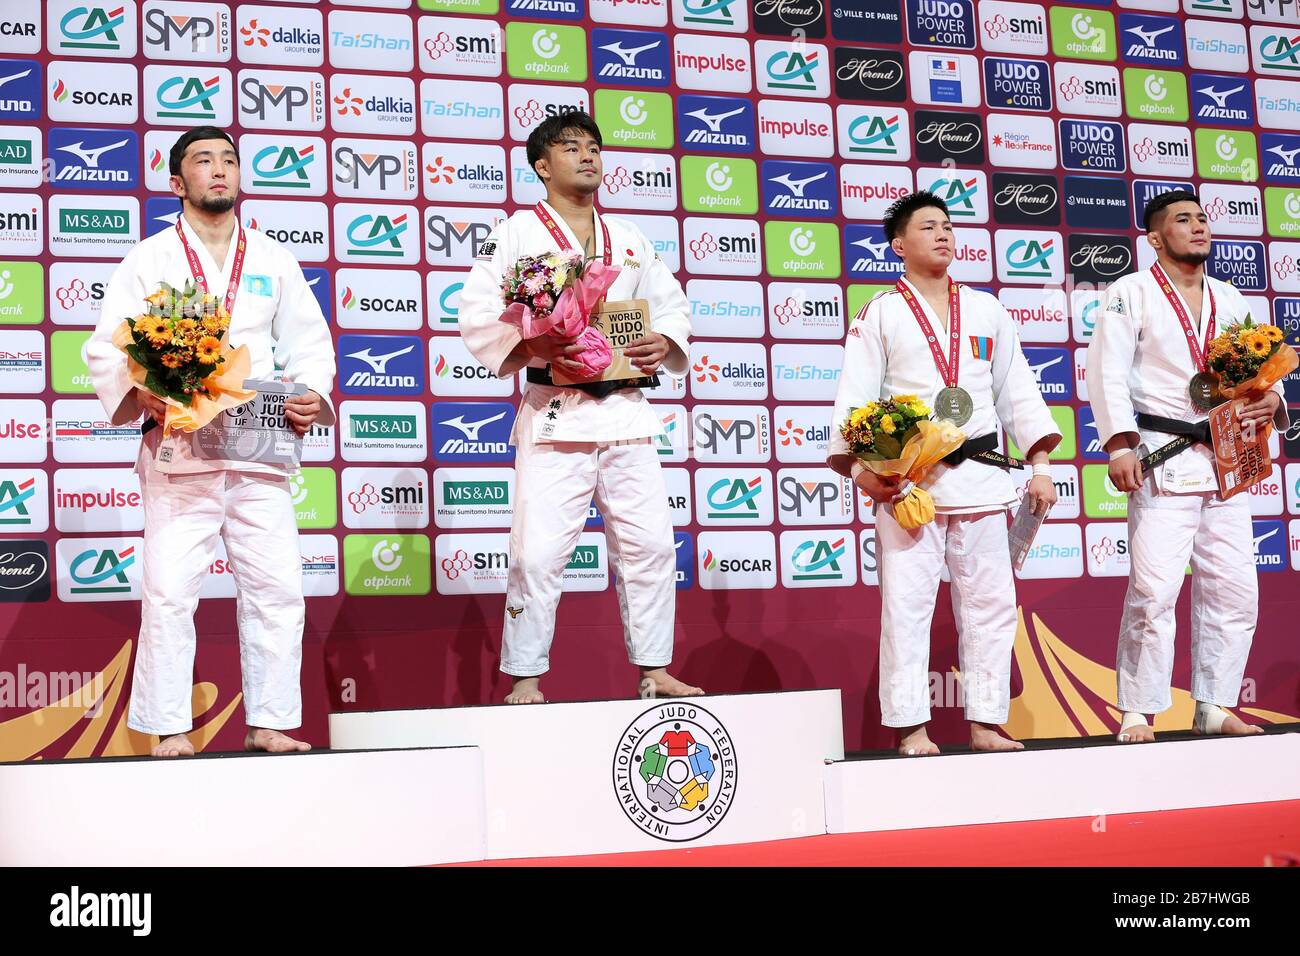 Paris, France - 08th Feb, 2020: Men's -73 kg, Medal Ceremony, of which the winner Soichi Hashimoto for Japan (Credit: Mickael Chavet) Stock Photo